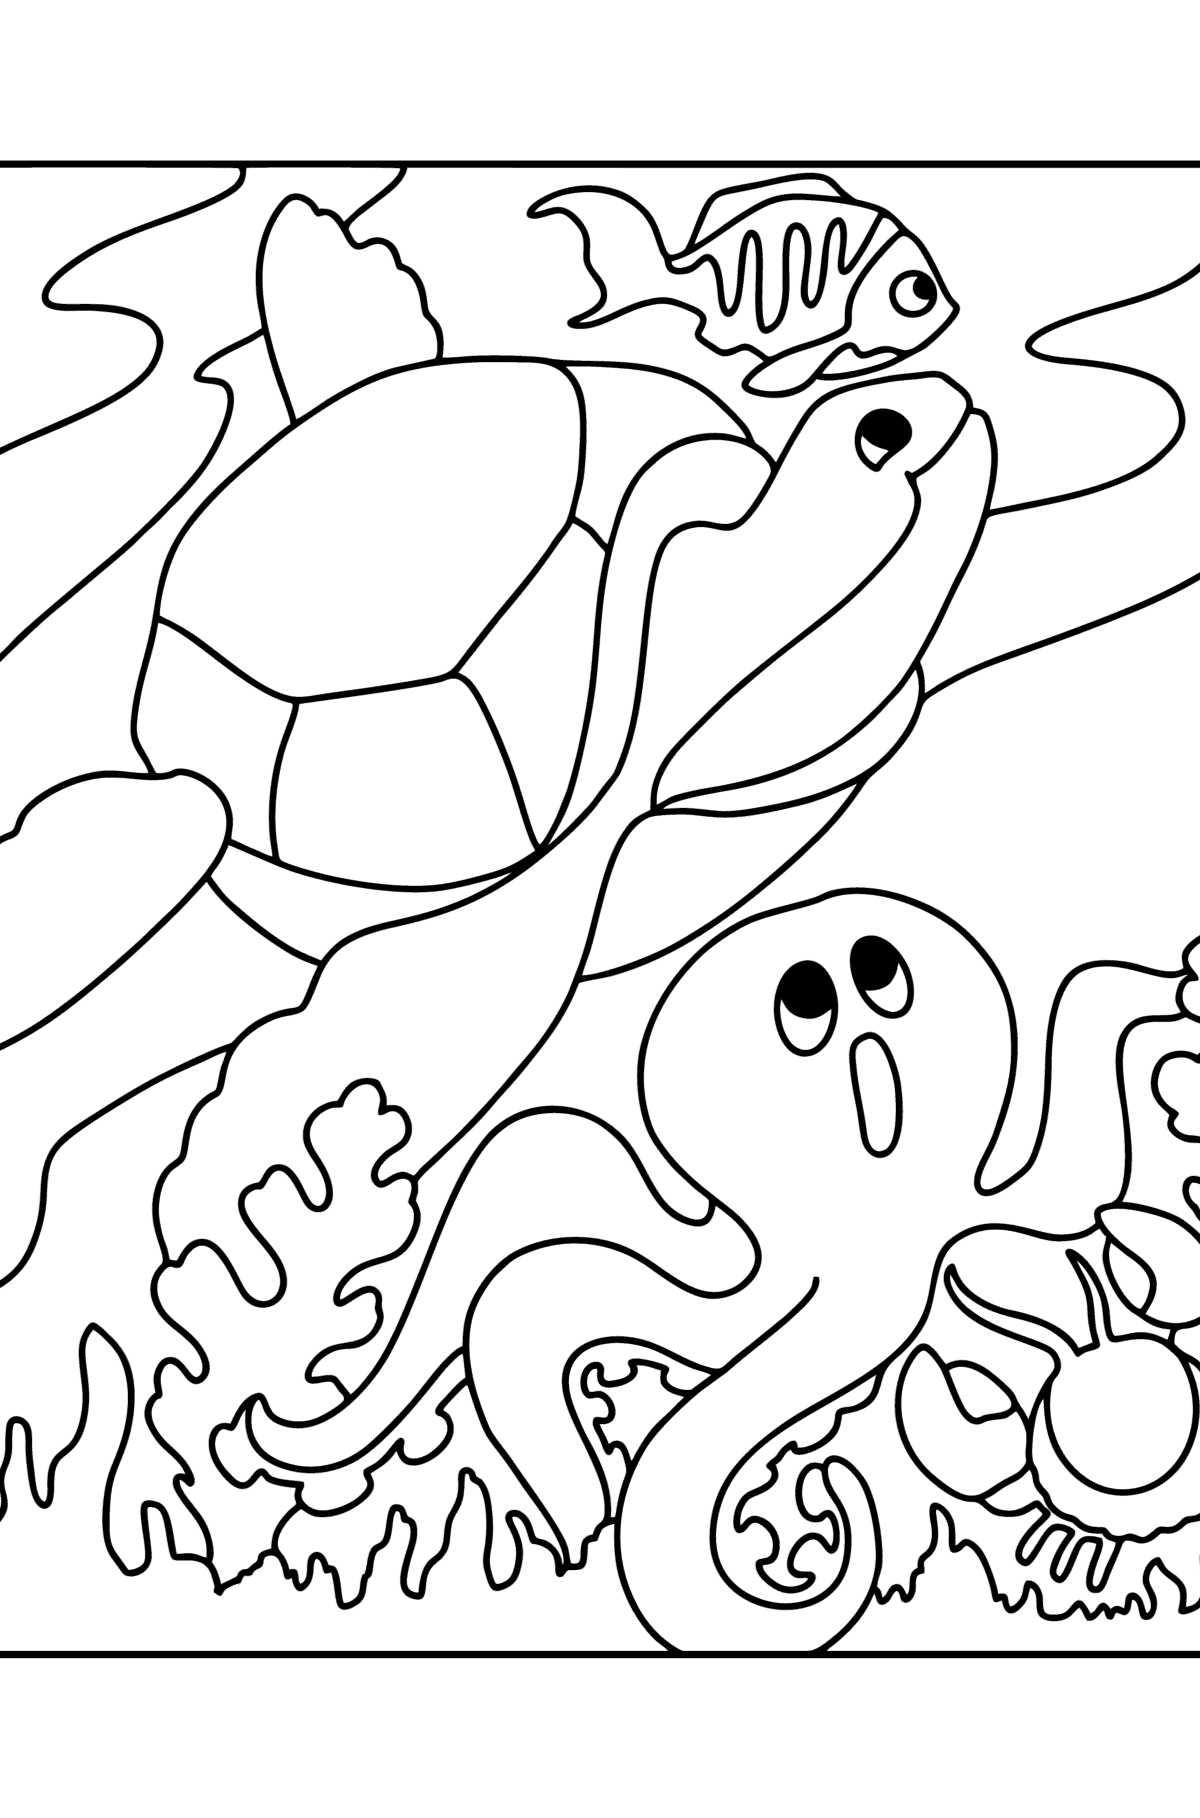 Fish, Turtle, Crab and Octopus coloring page - Coloring Pages for Kids